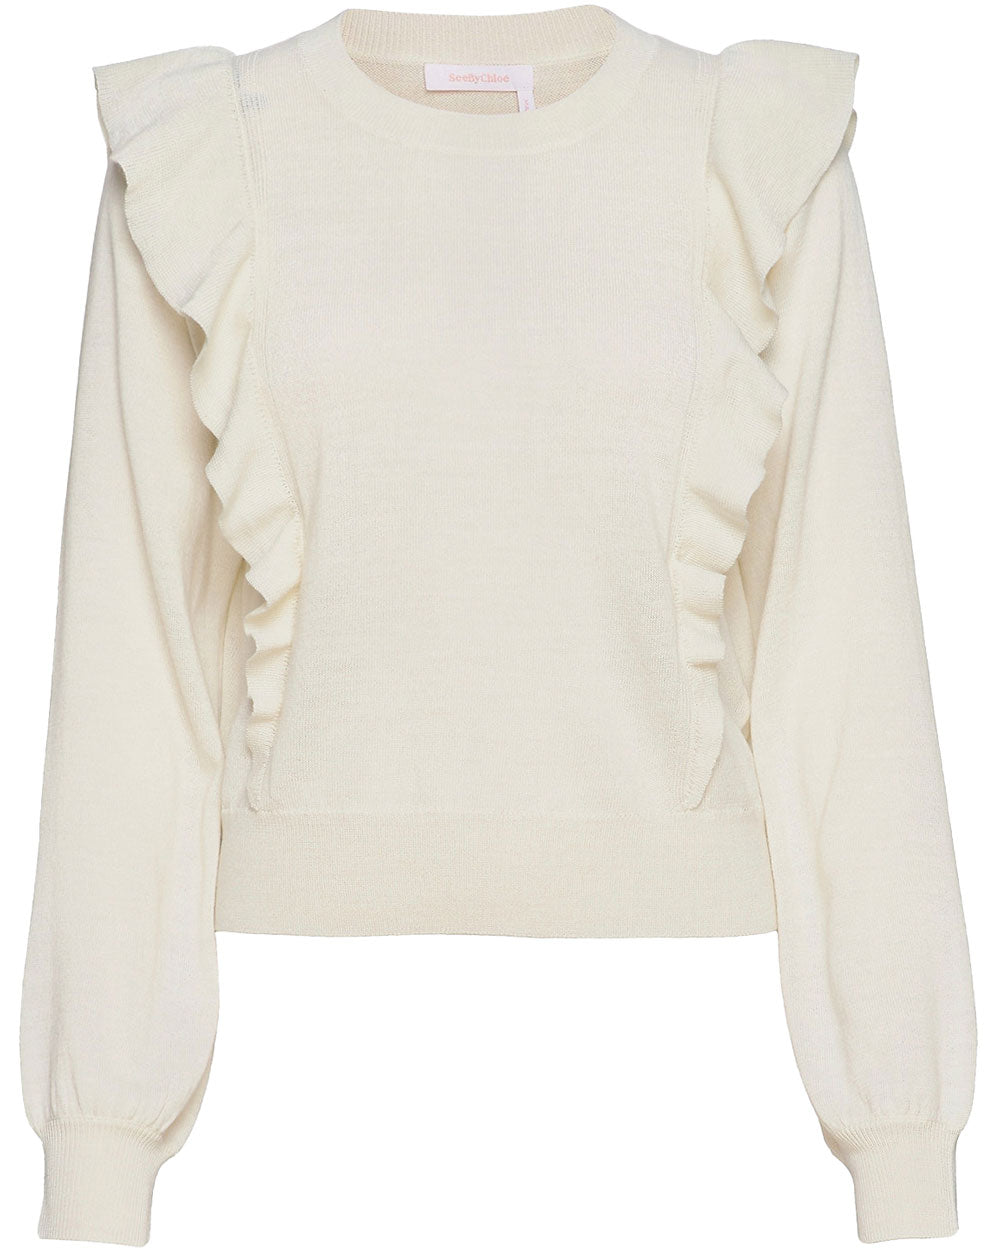 Cloudy White Long Sleeve Ruffle Pullover